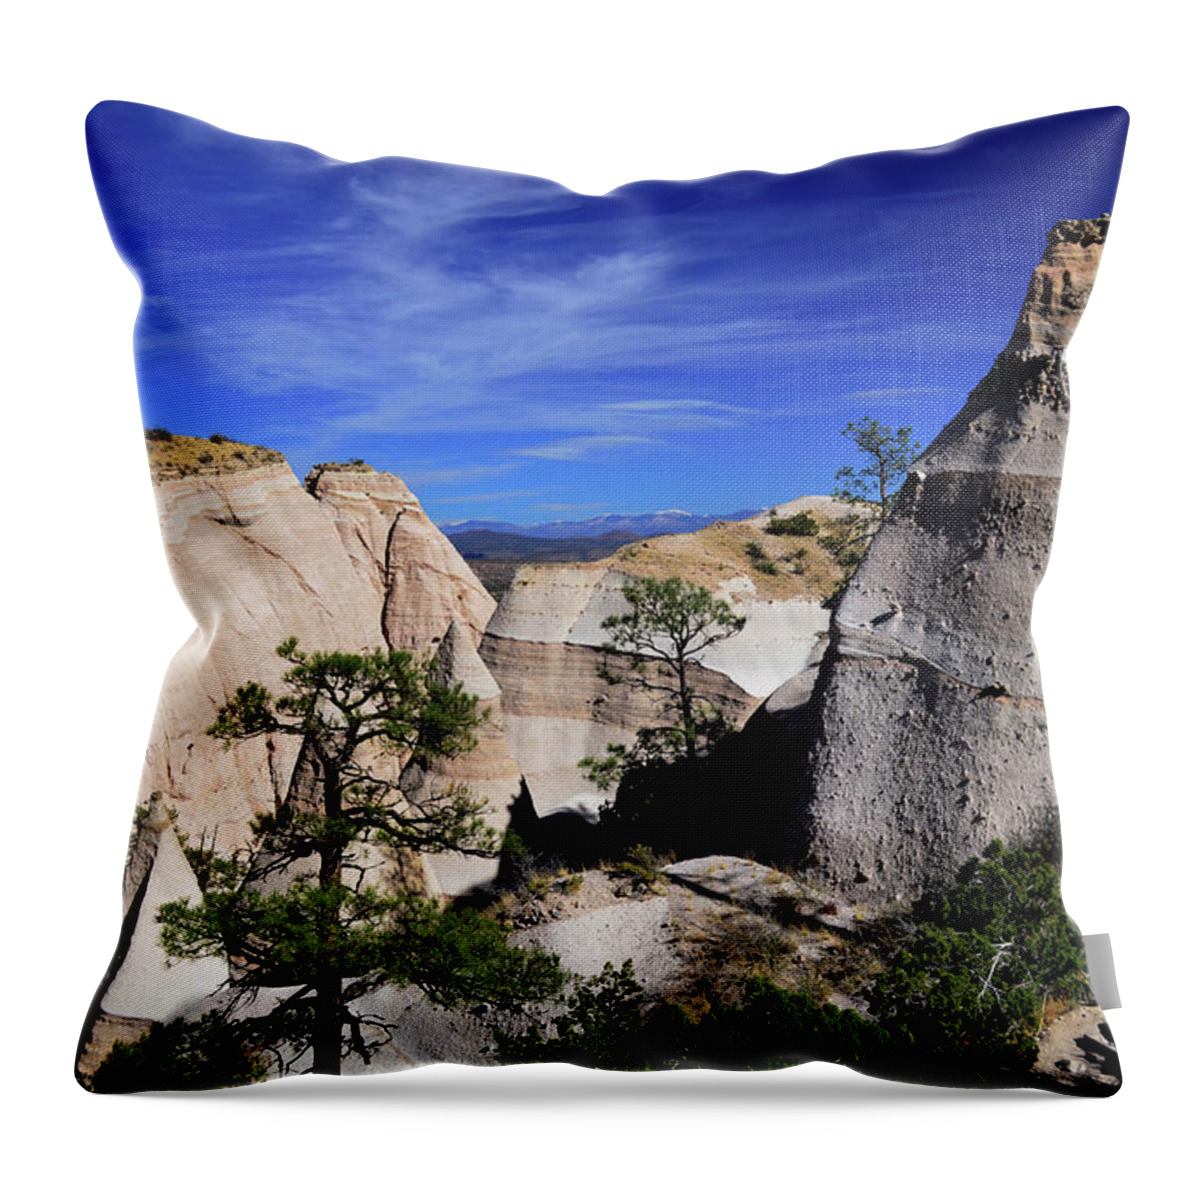 Tent Rocks Throw Pillow featuring the photograph Under Blue Sky by Segura Shaw Photography